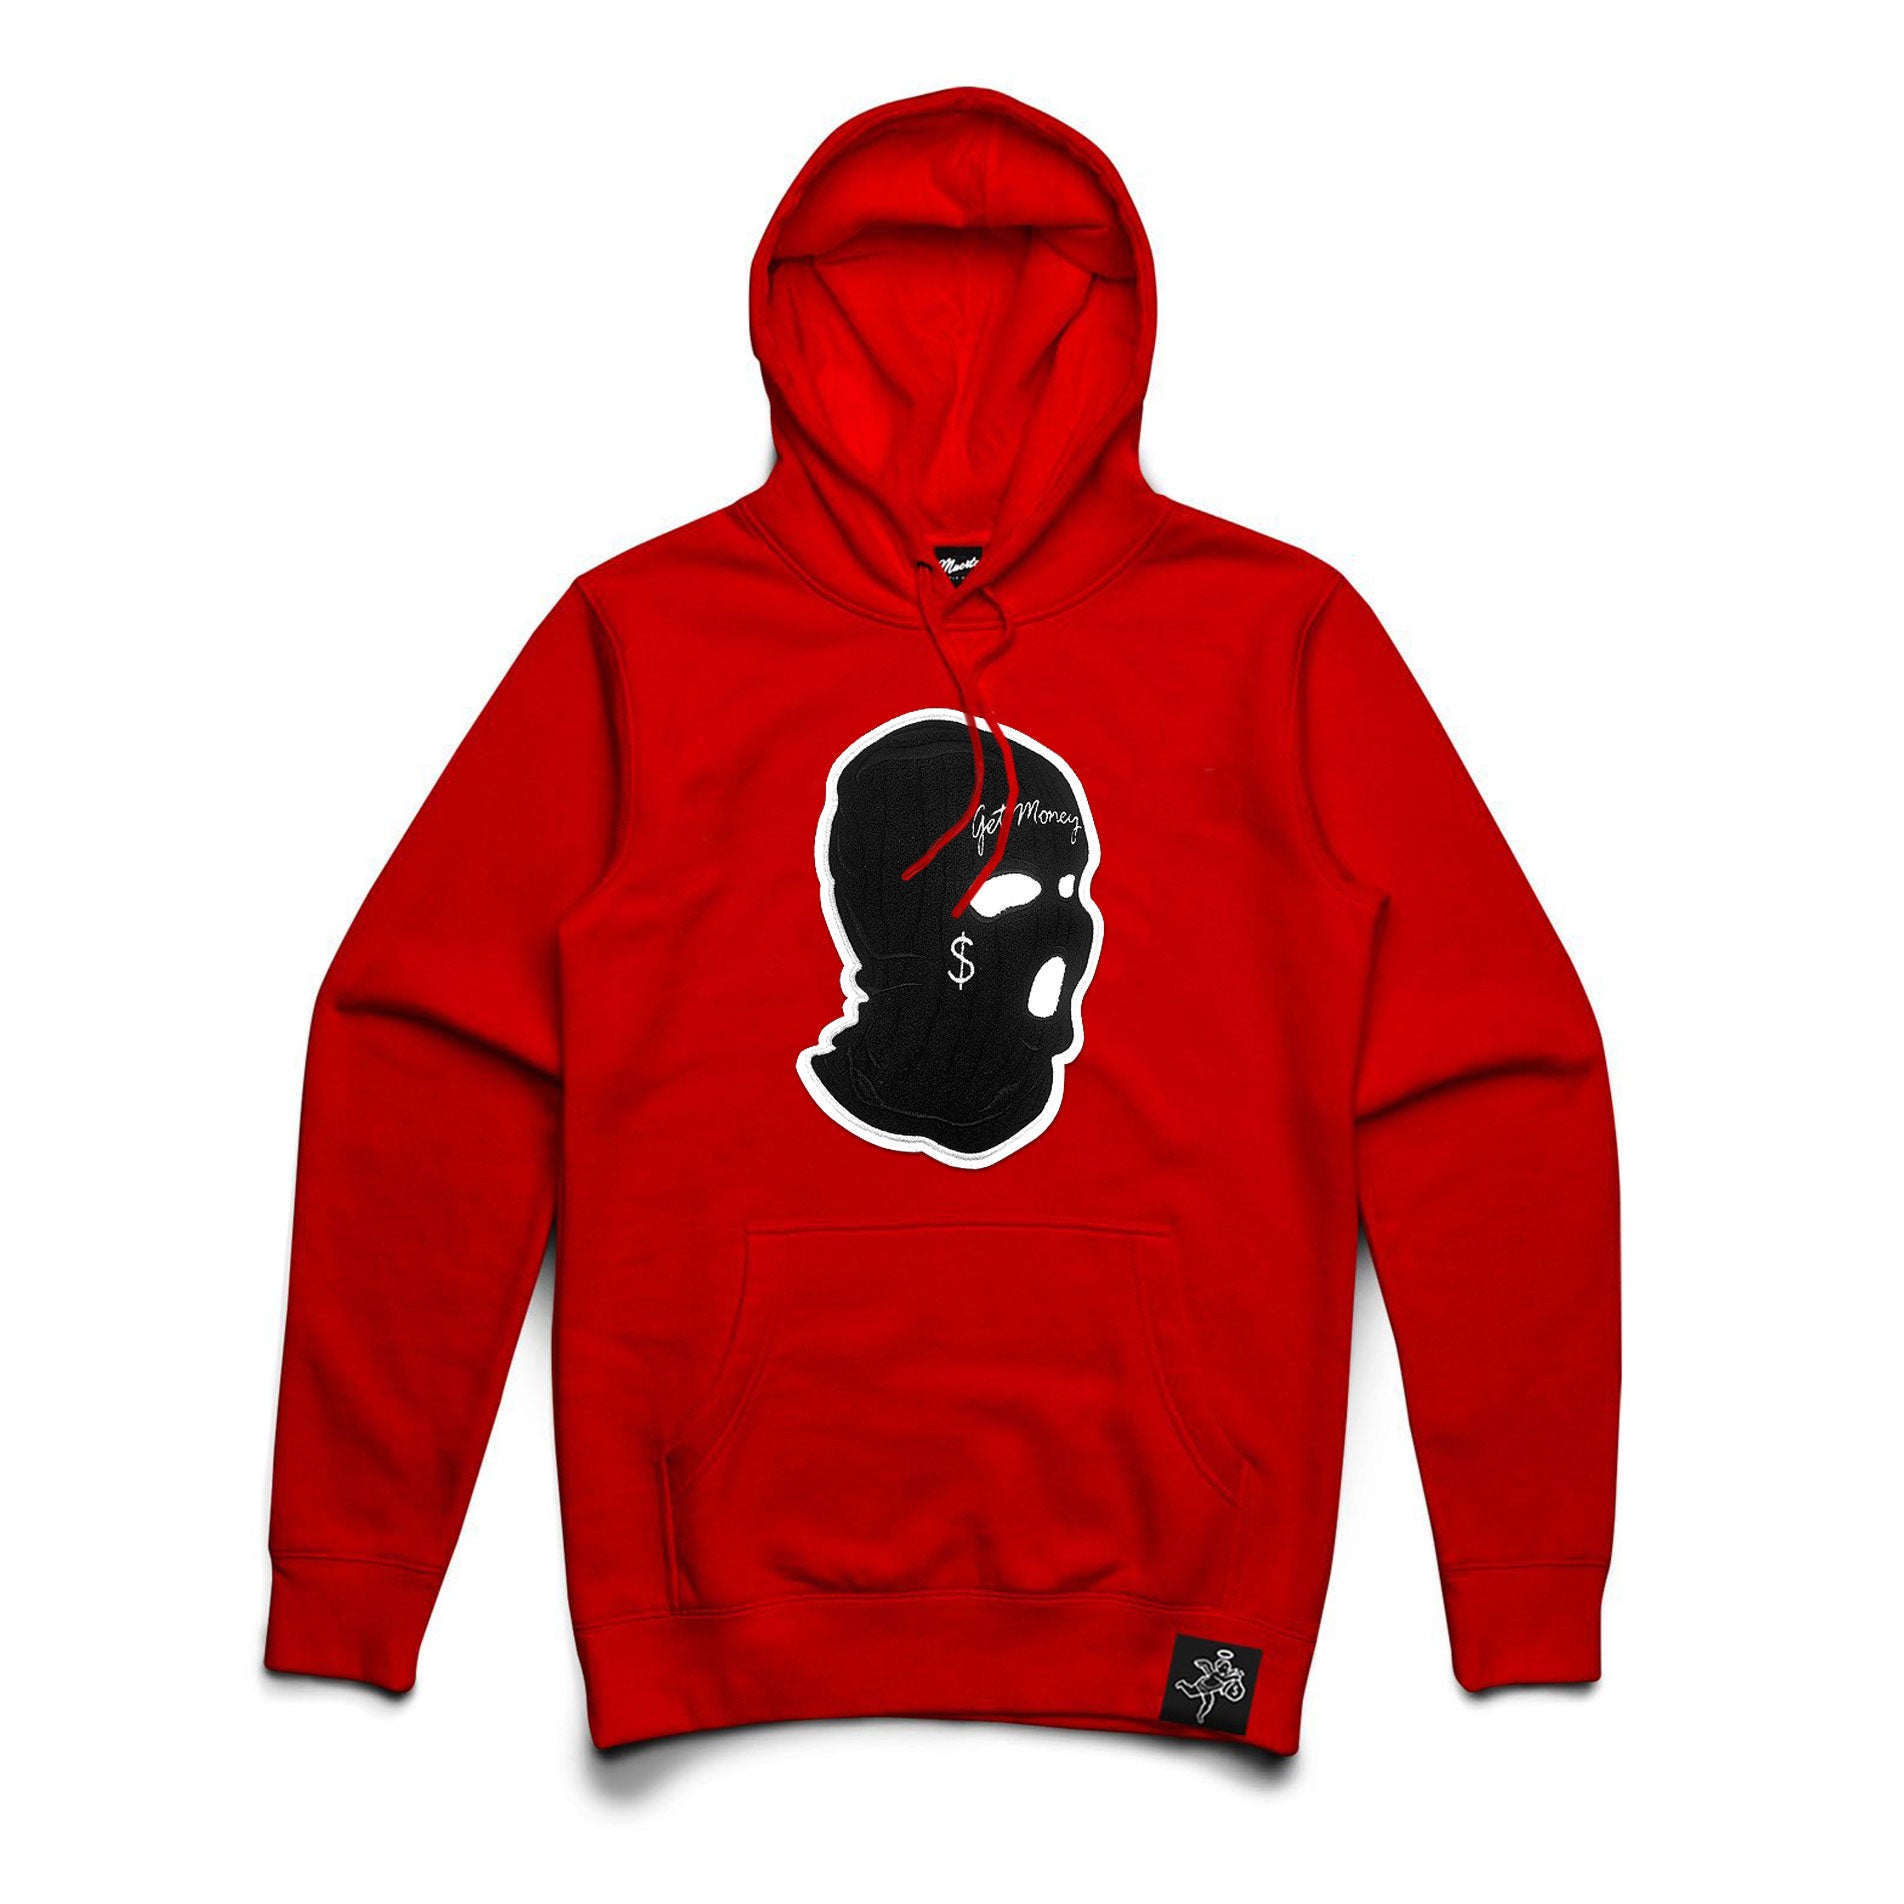 AJ11 GET MONEY MASK CHENILLE PATCH Hoodie Big and Tall